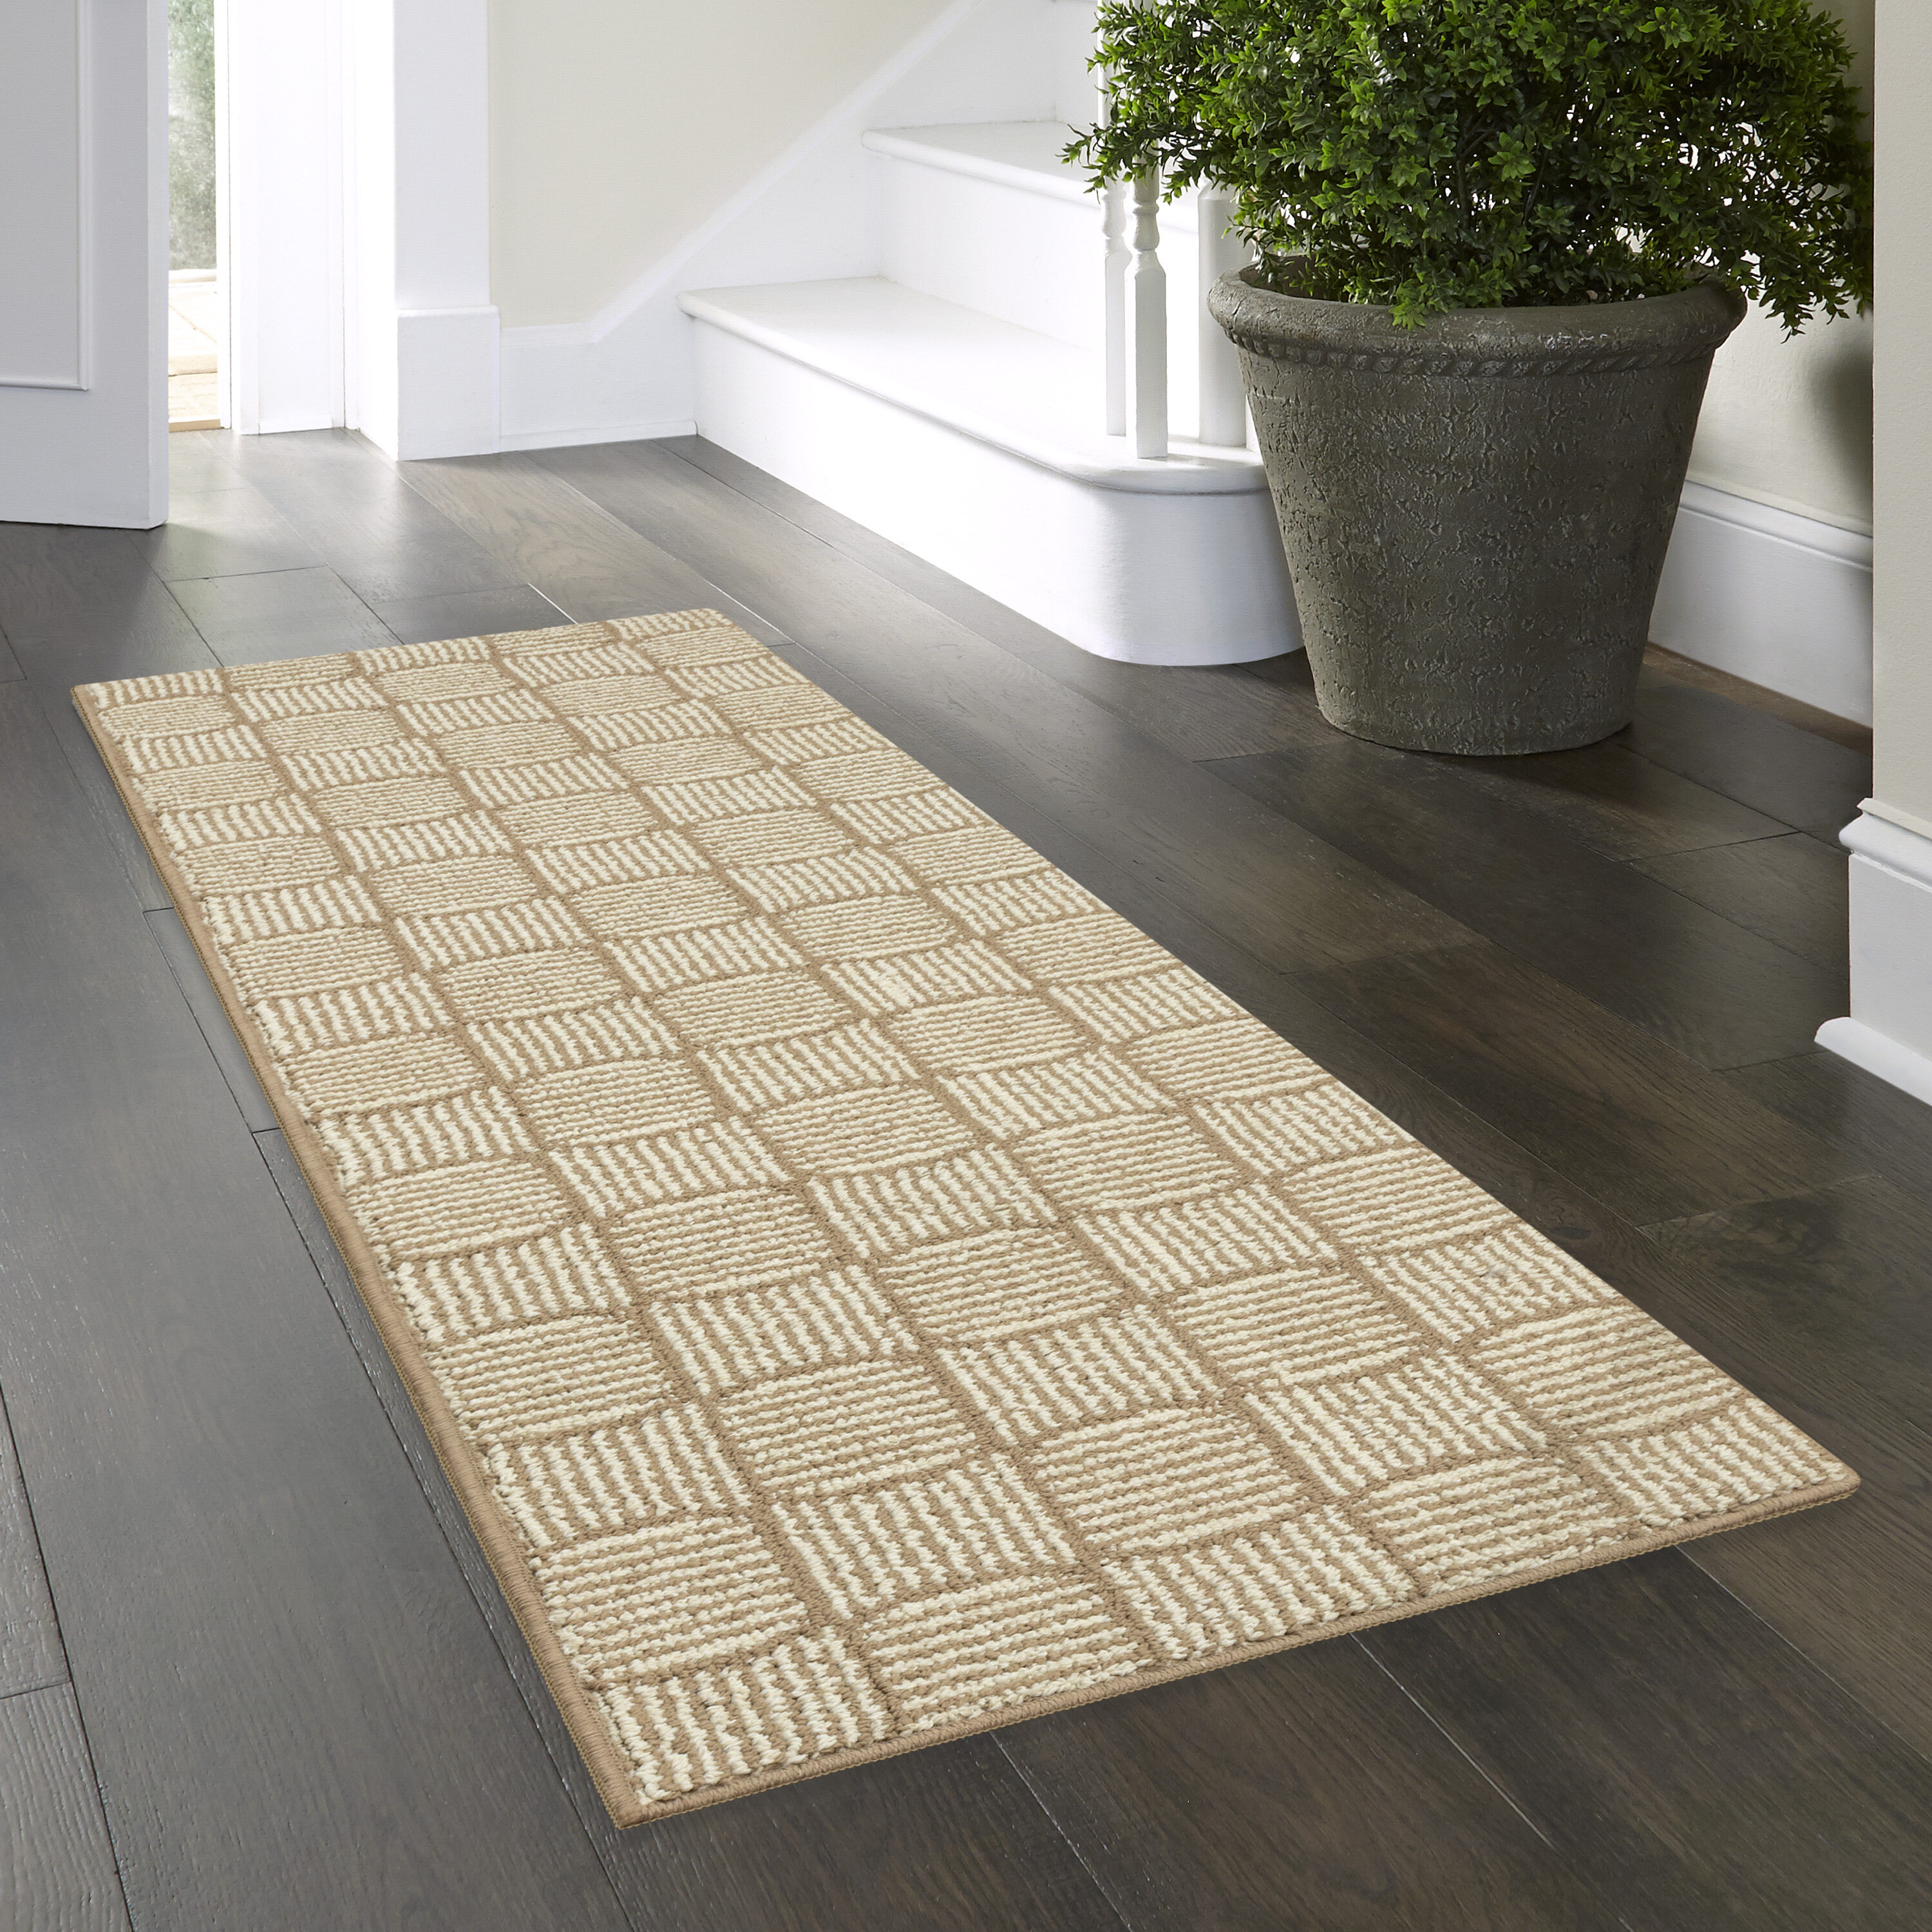 Braided rug, Our braided kitchen rugs were made by an elder…